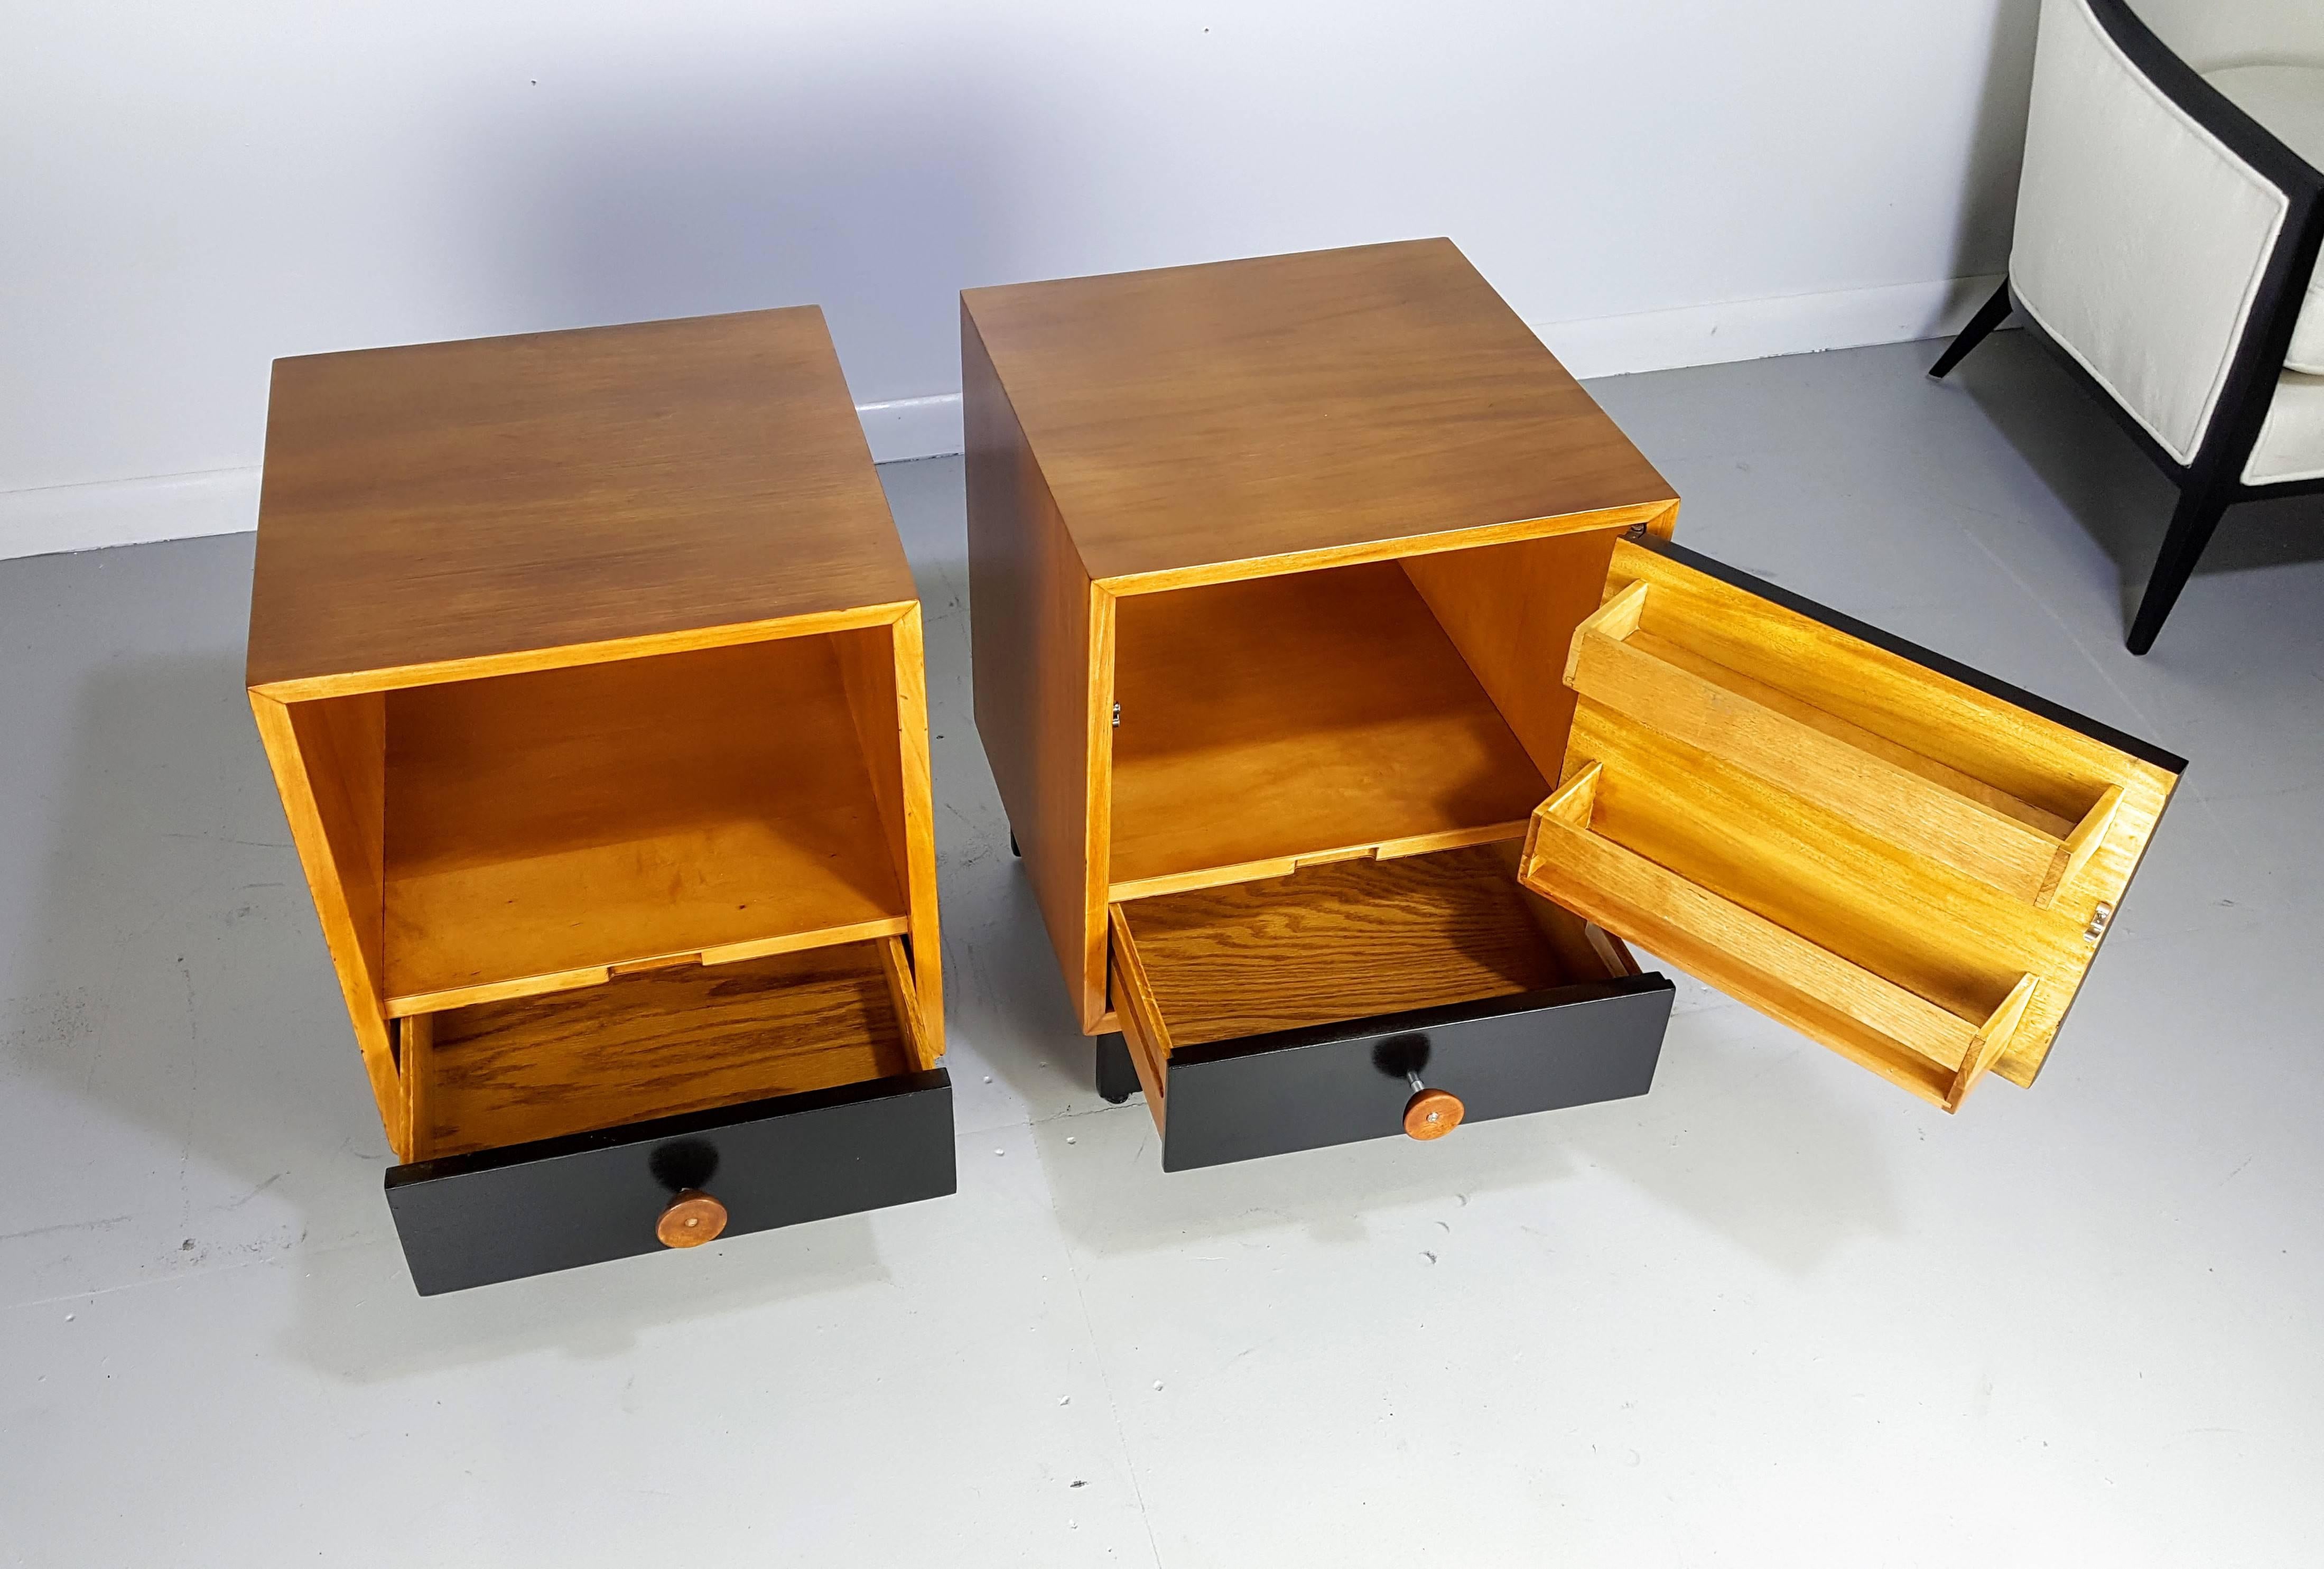 Classic Midcentury nightstands with cupcake pulls by George Nelson for Herman Miller, 1950s. Fully restored and in gorgeous condition.

See this item in our private NYC showroom! Refine Limited is located in the heart of Chelsea at the history